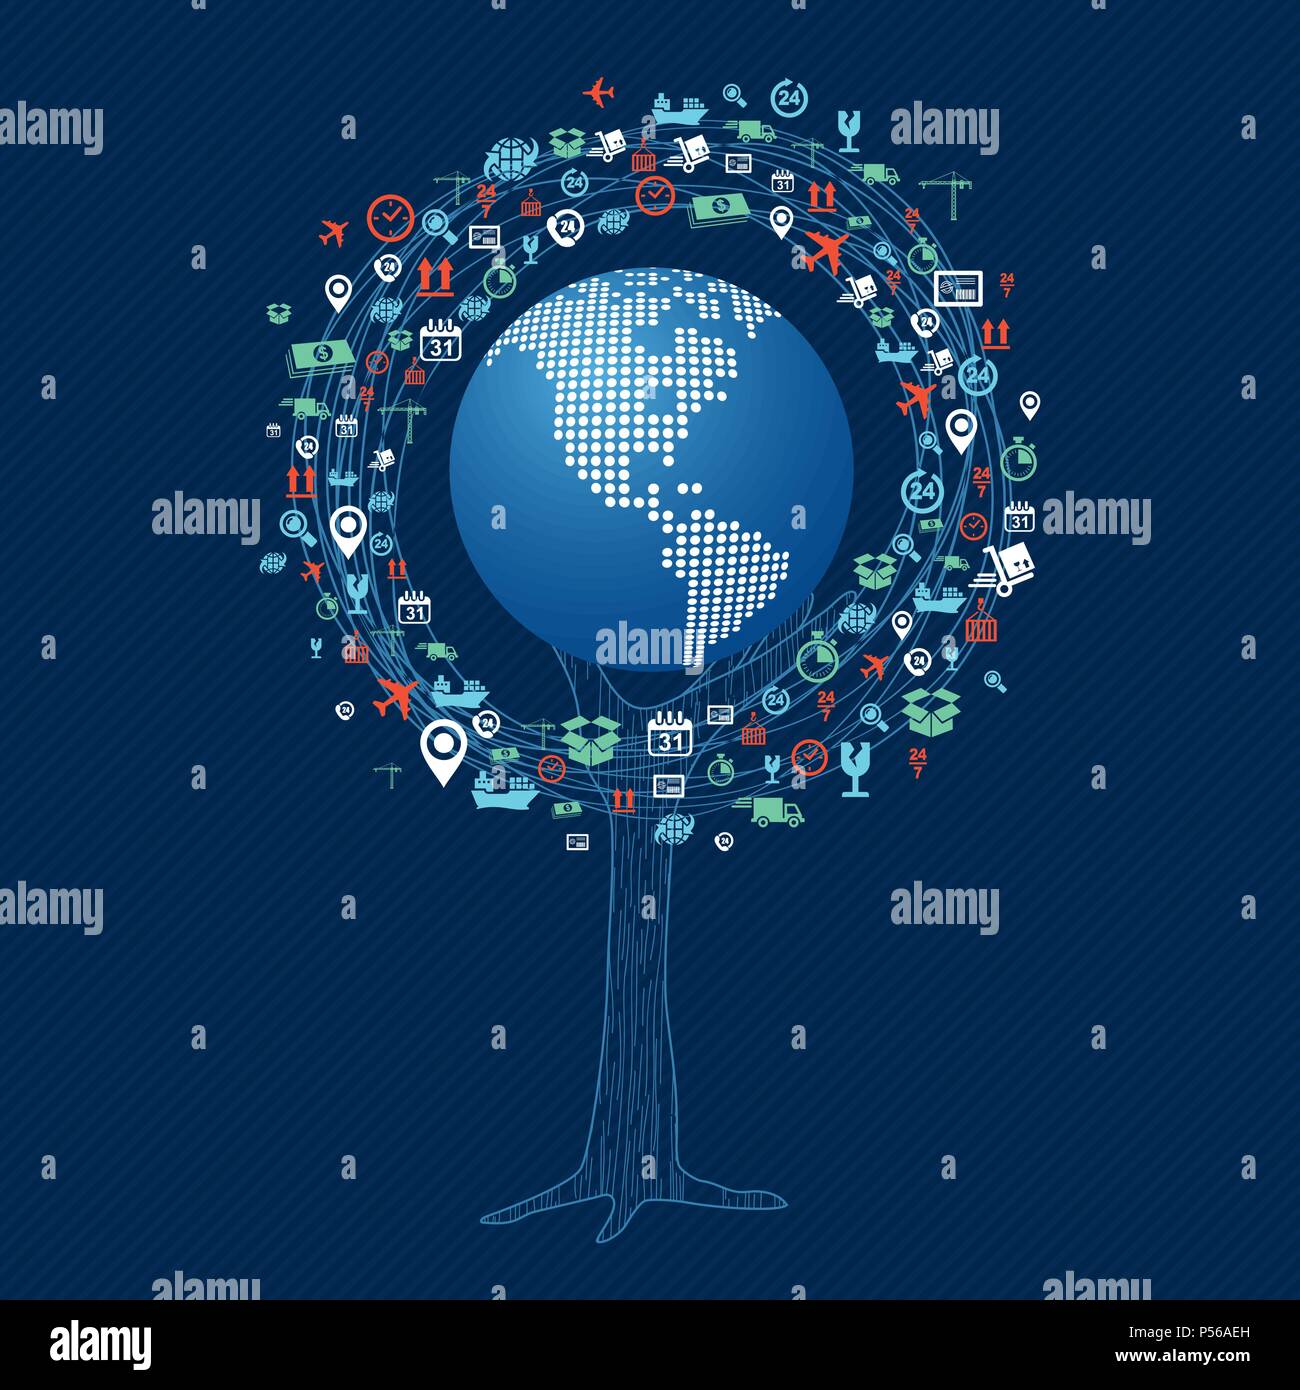 Tree with technology world concept. Global communication idea, internet icons and symbol decoration. EPS10 vector. Stock Vector